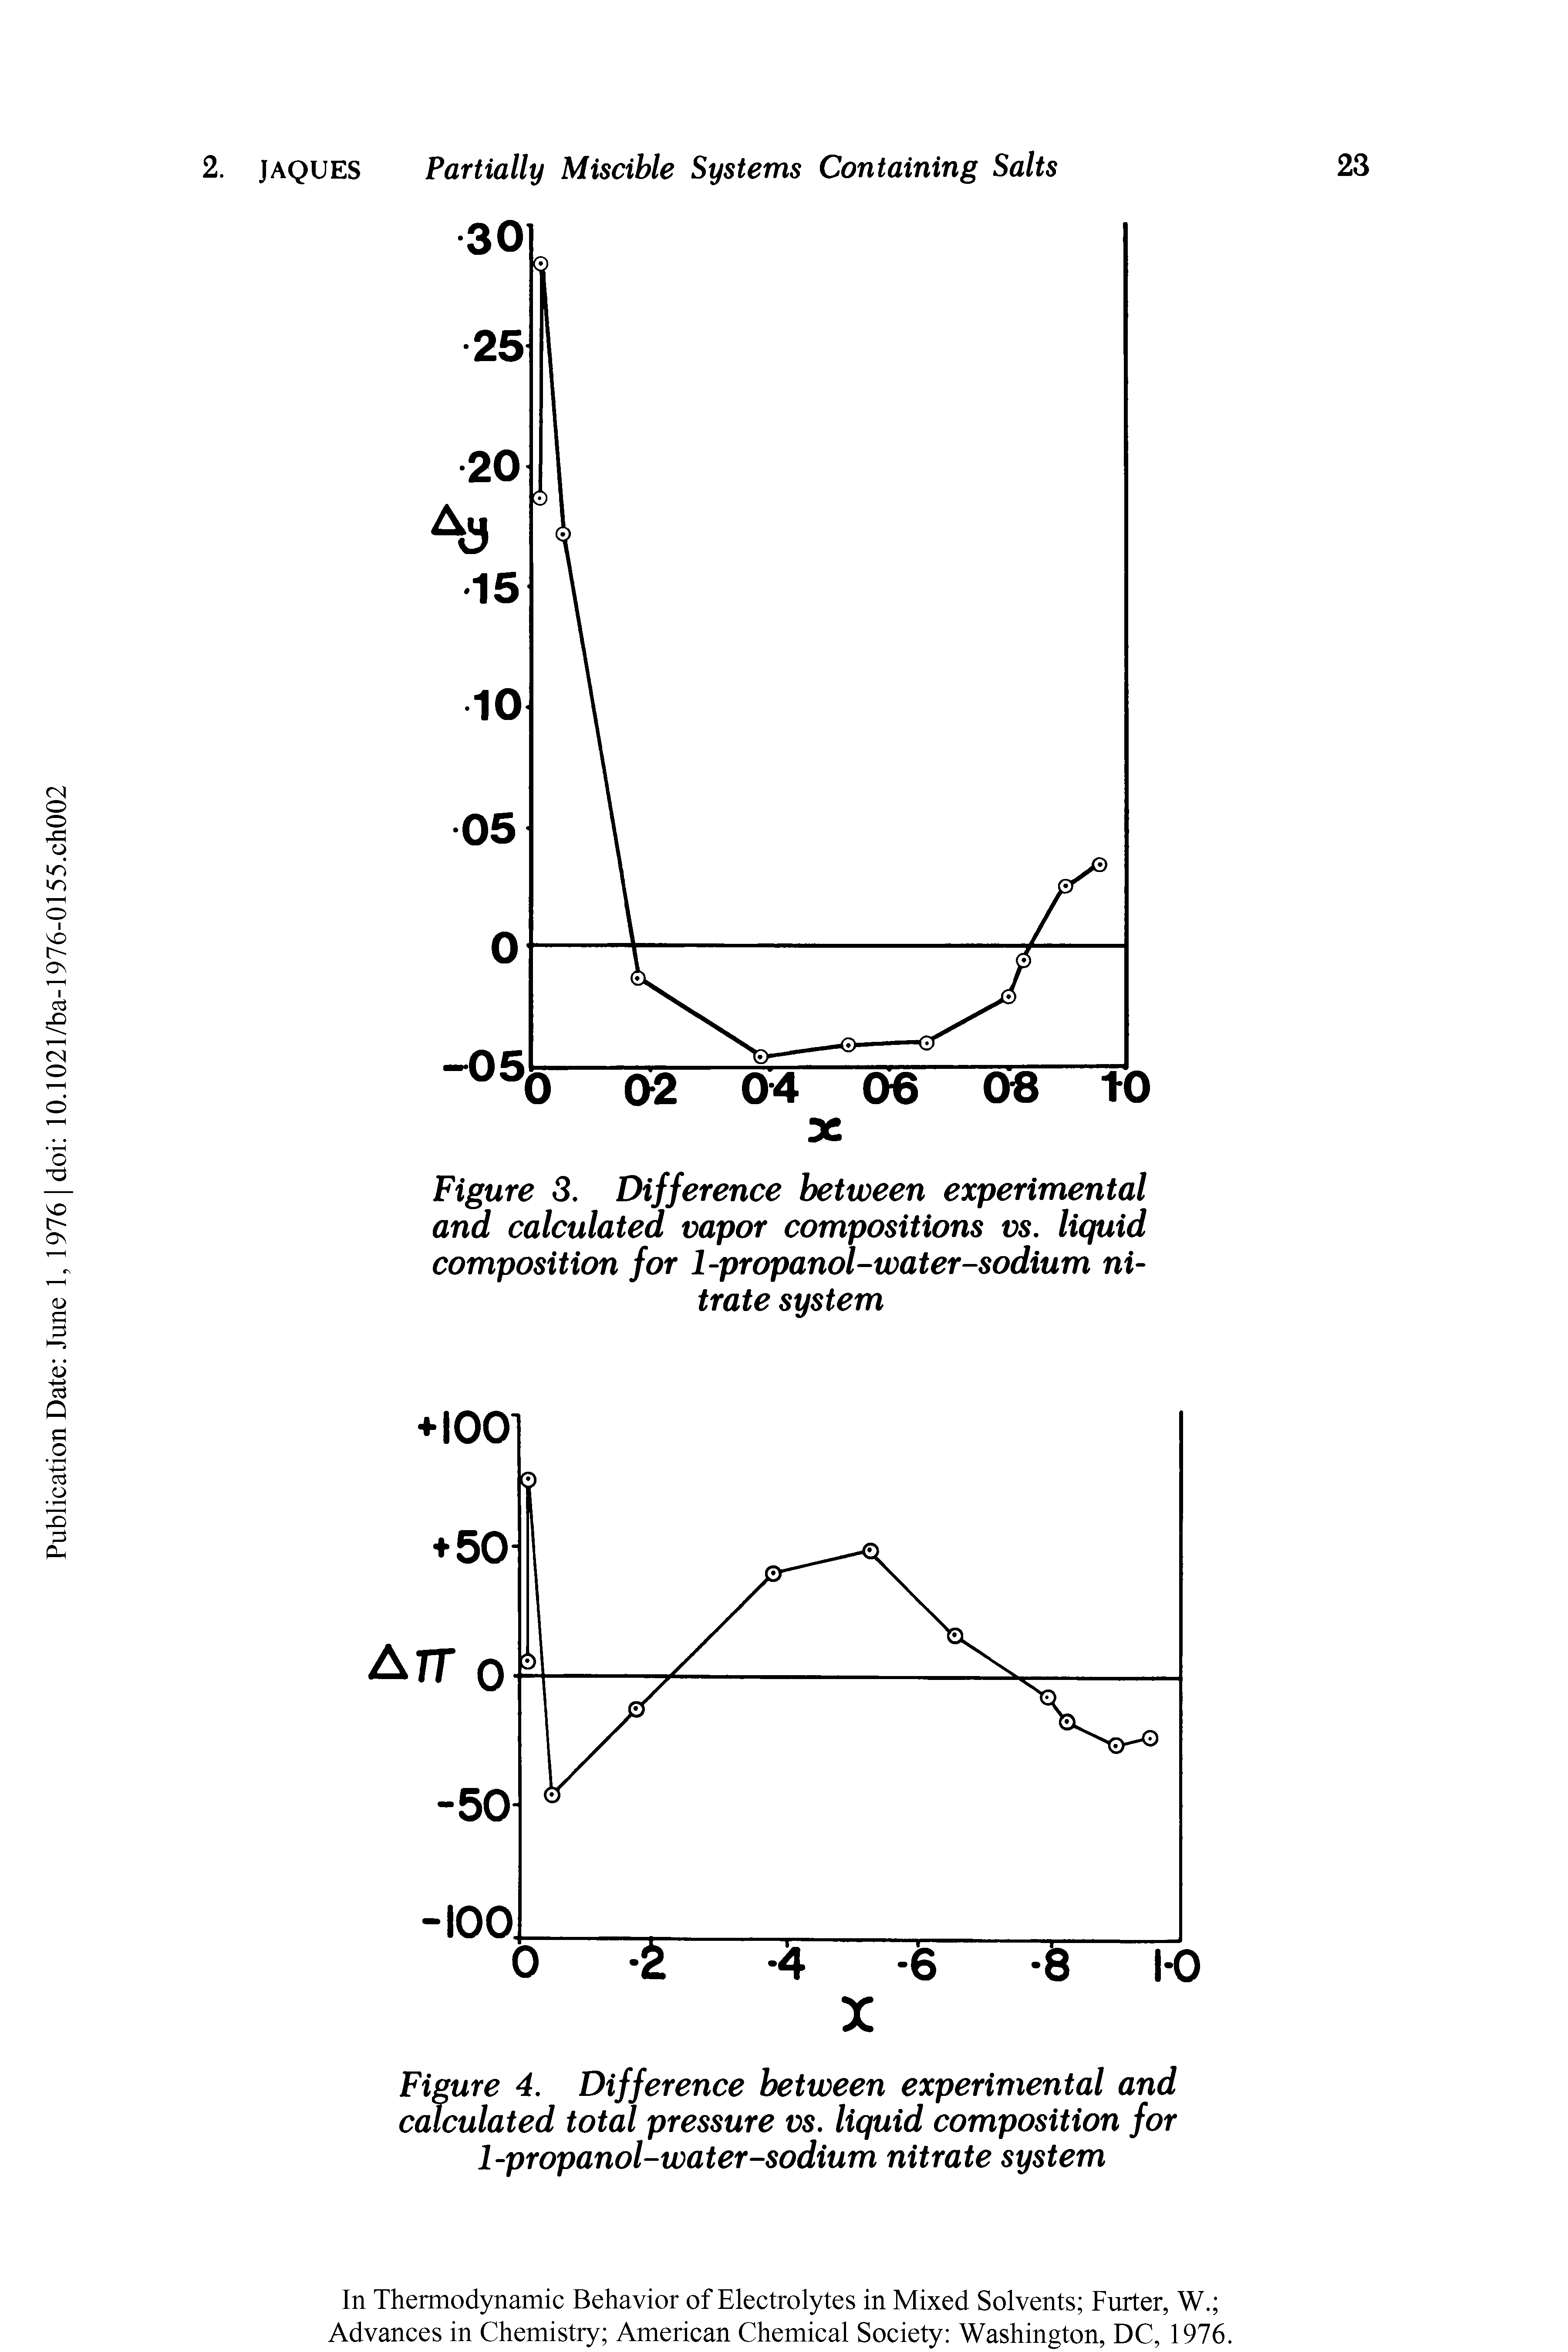 Figure 3. Difference between experimental and calculated vapor compositions vs. liquid composition for 1-propanol-water-sodium nitrate system...